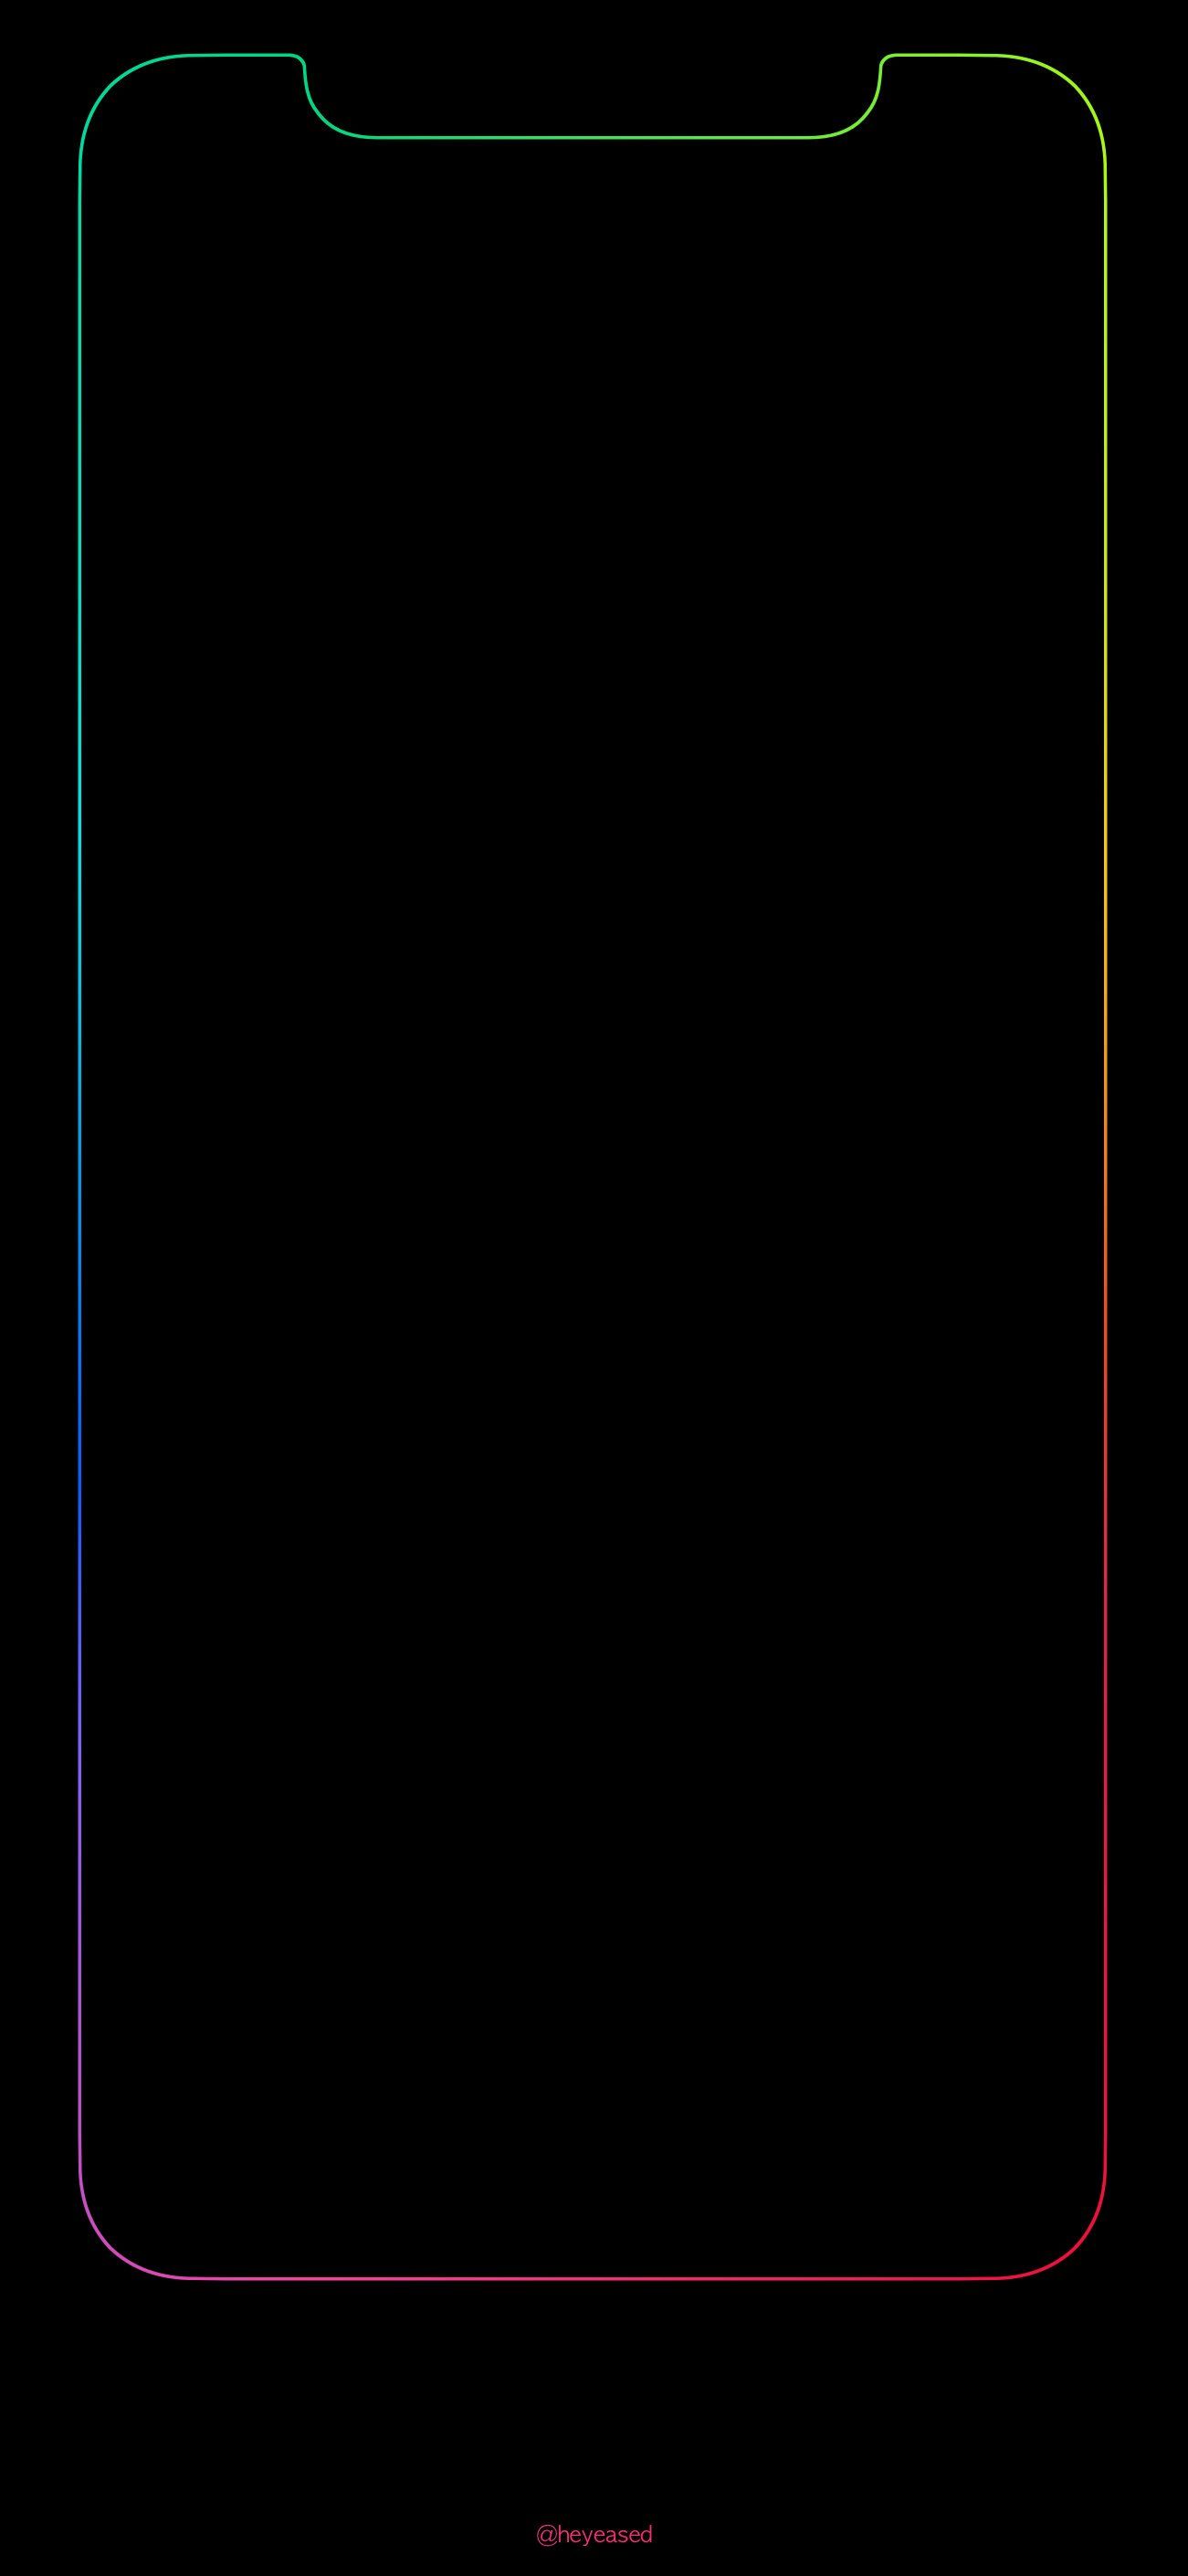 Anyone know of a background like this for the Pixel 3XL?